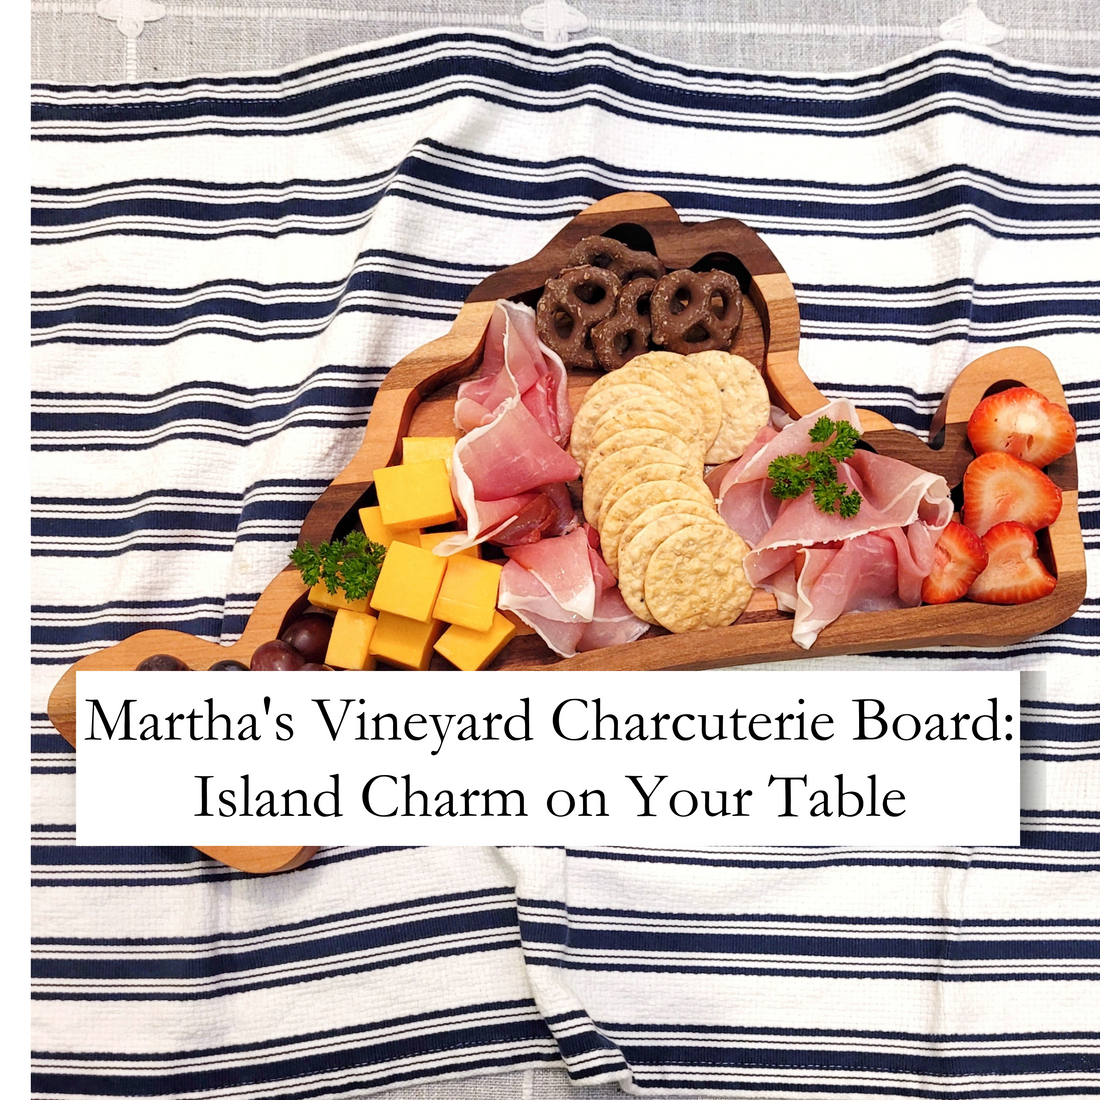 Elevate Your Entertaining Game with a Martha's Vineyard-Inspired Charcuterie Board!